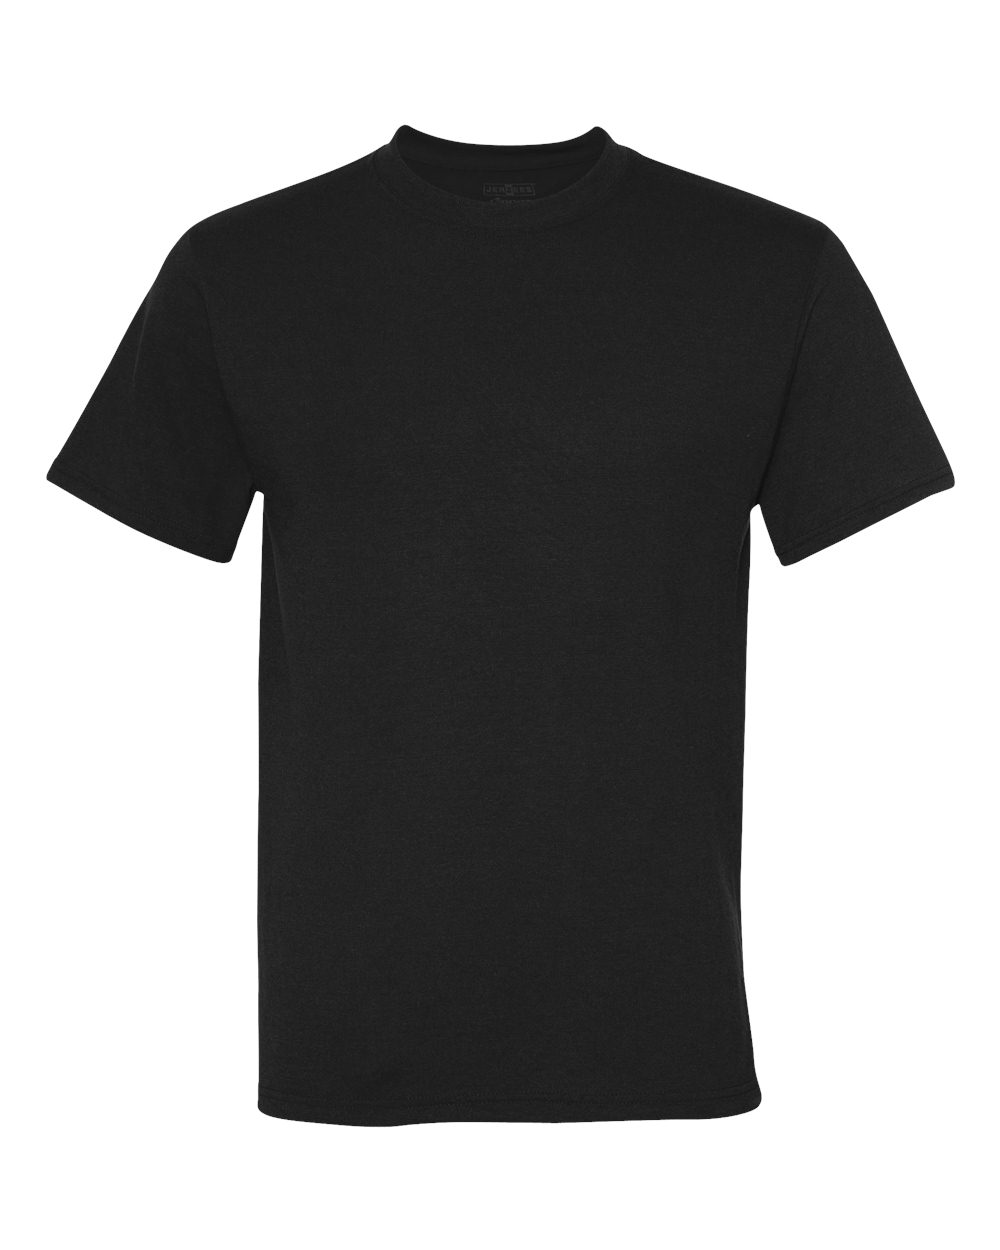 fully customizable jerzees dri-power performance short sleeve tee shirt in multiple sizes and colors